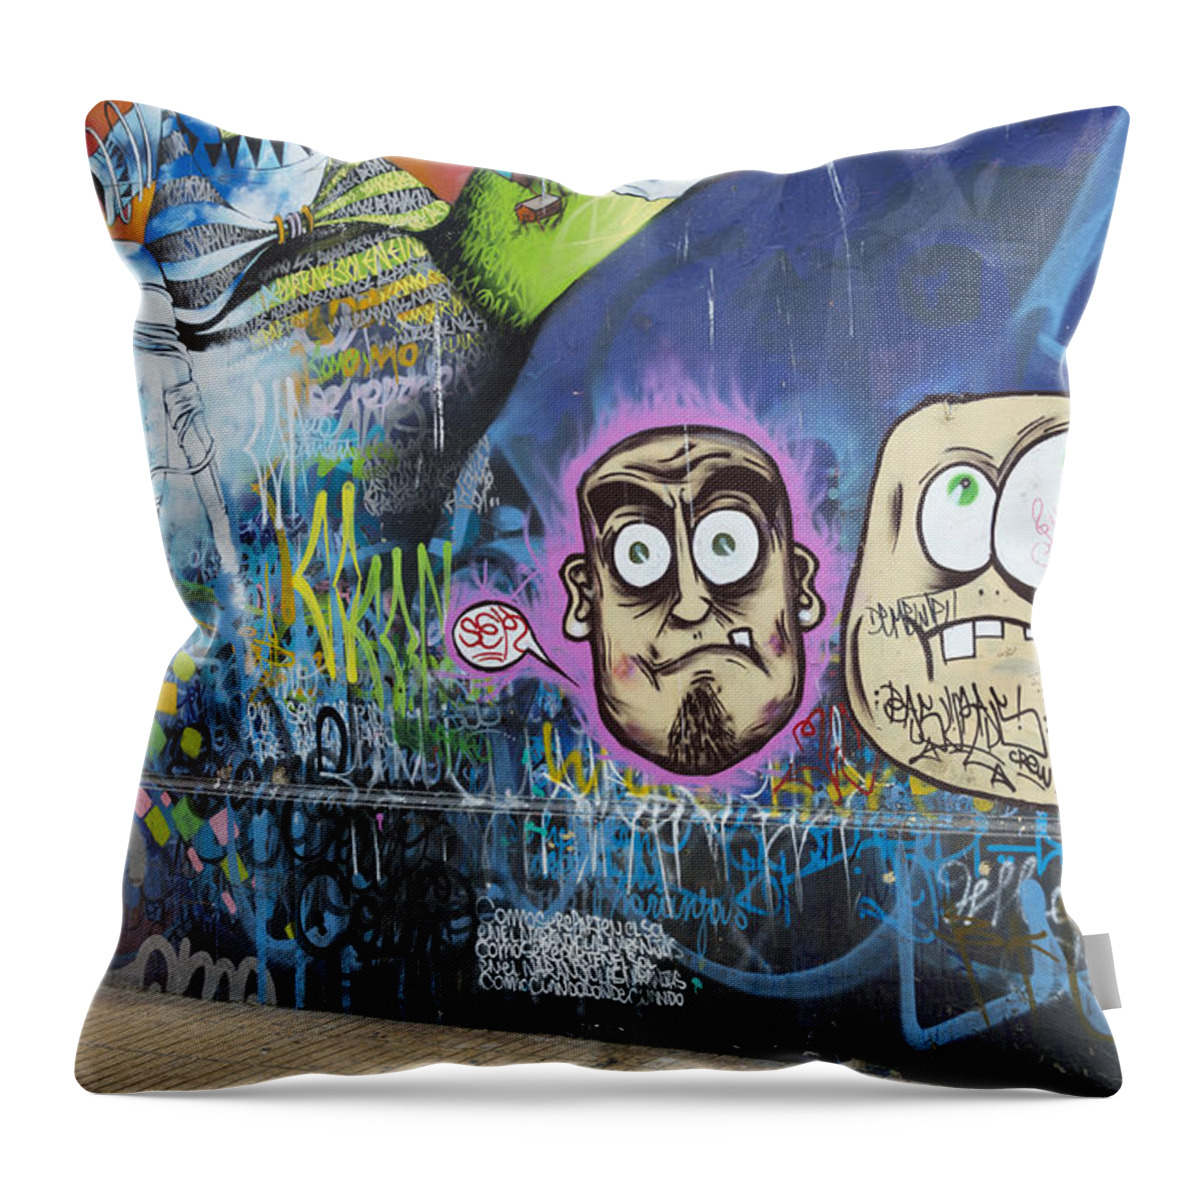 Chile Throw Pillow featuring the painting Graffiti Wall Art In Valparaiso, Chile by John Shaw